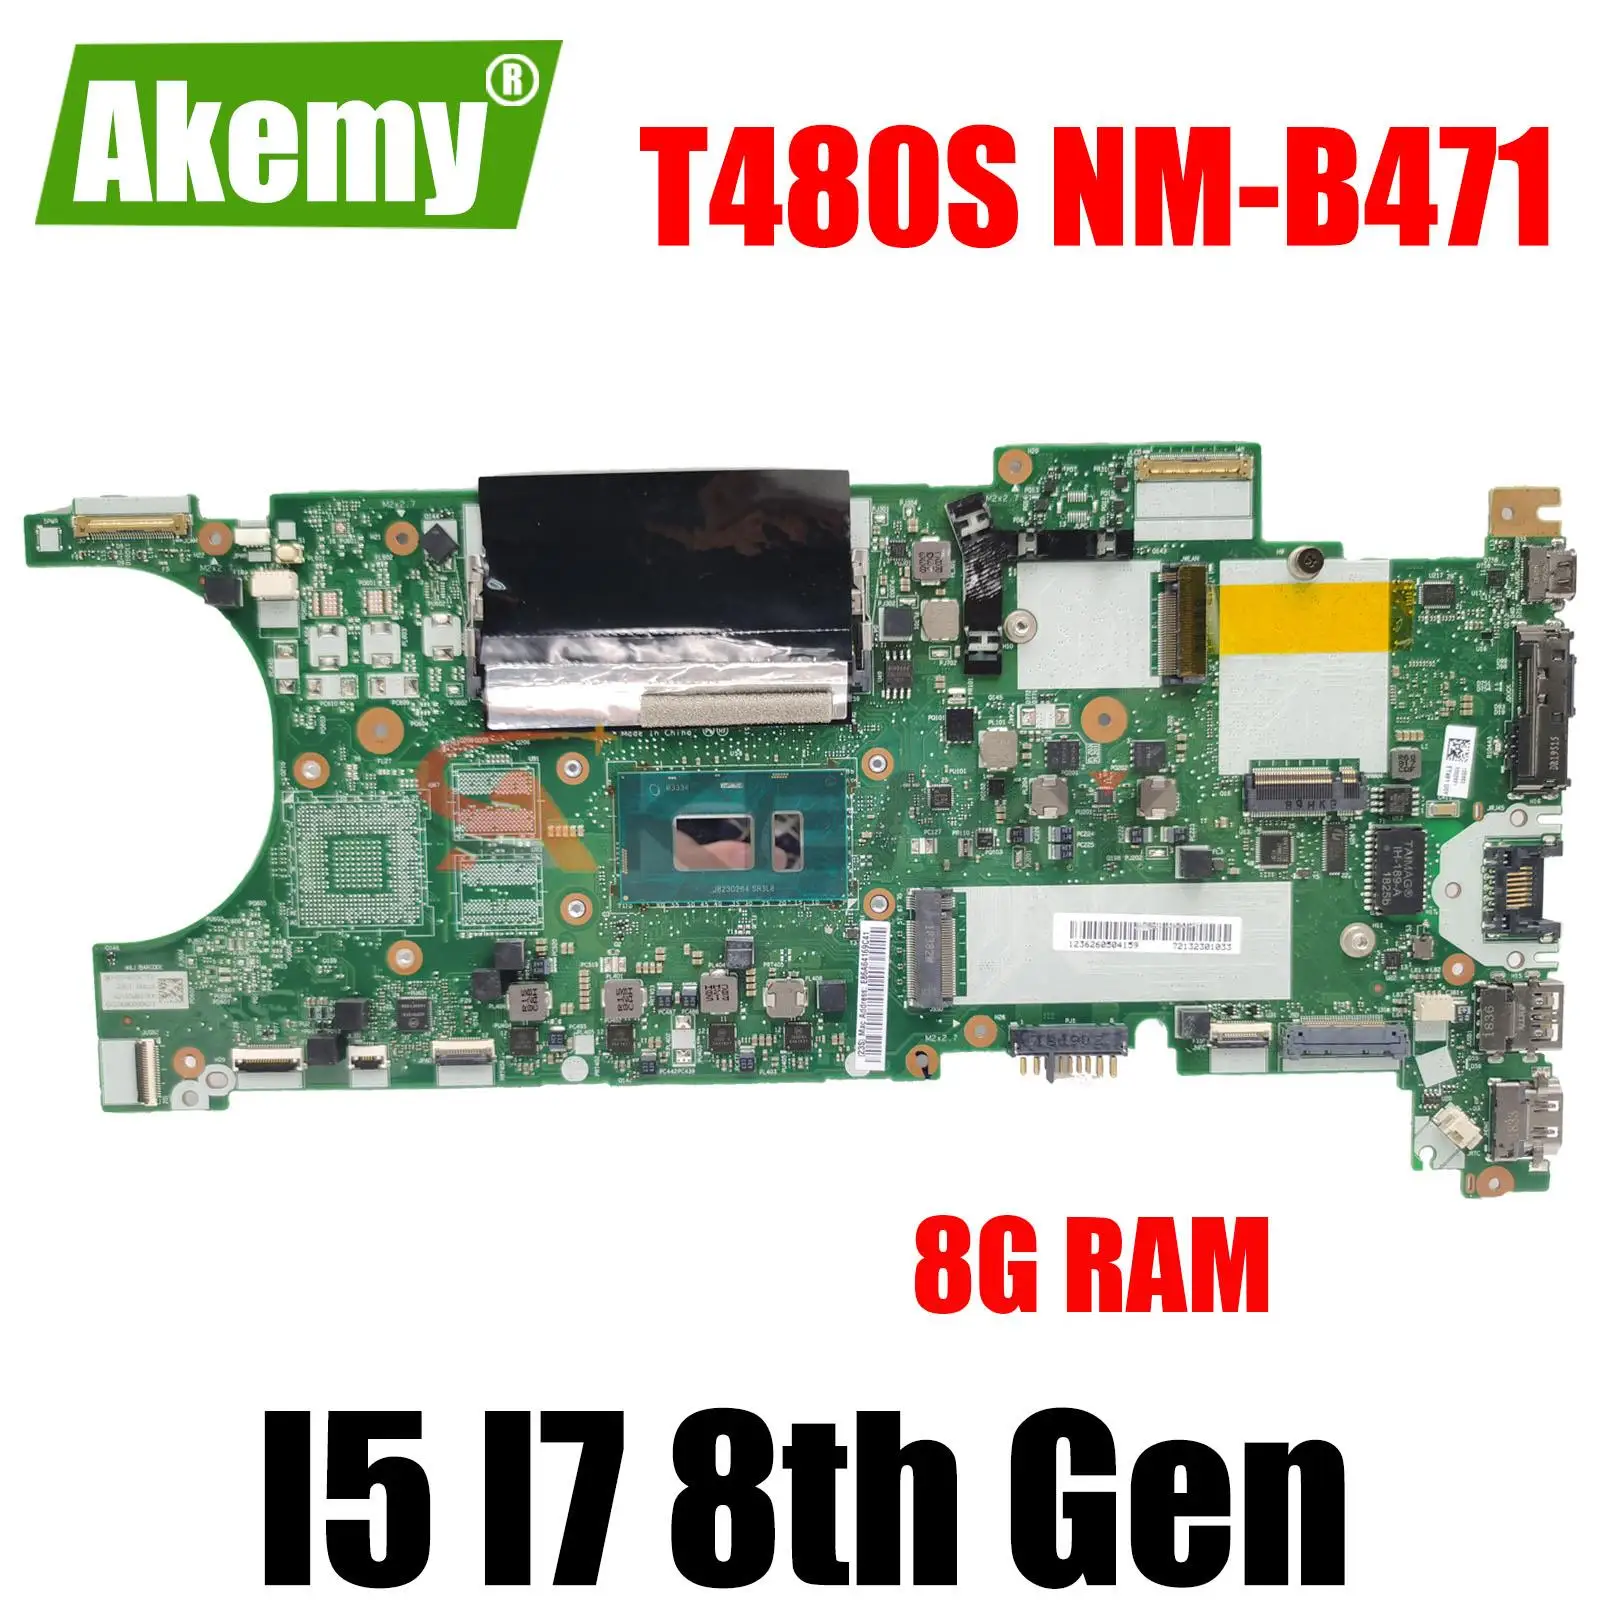 

For Lenovo Thinkpad T480S Notebook Computer Mainboard CPU: I5 I7 8th Gen 8G RAM ET481 NM-B471 Motherboard